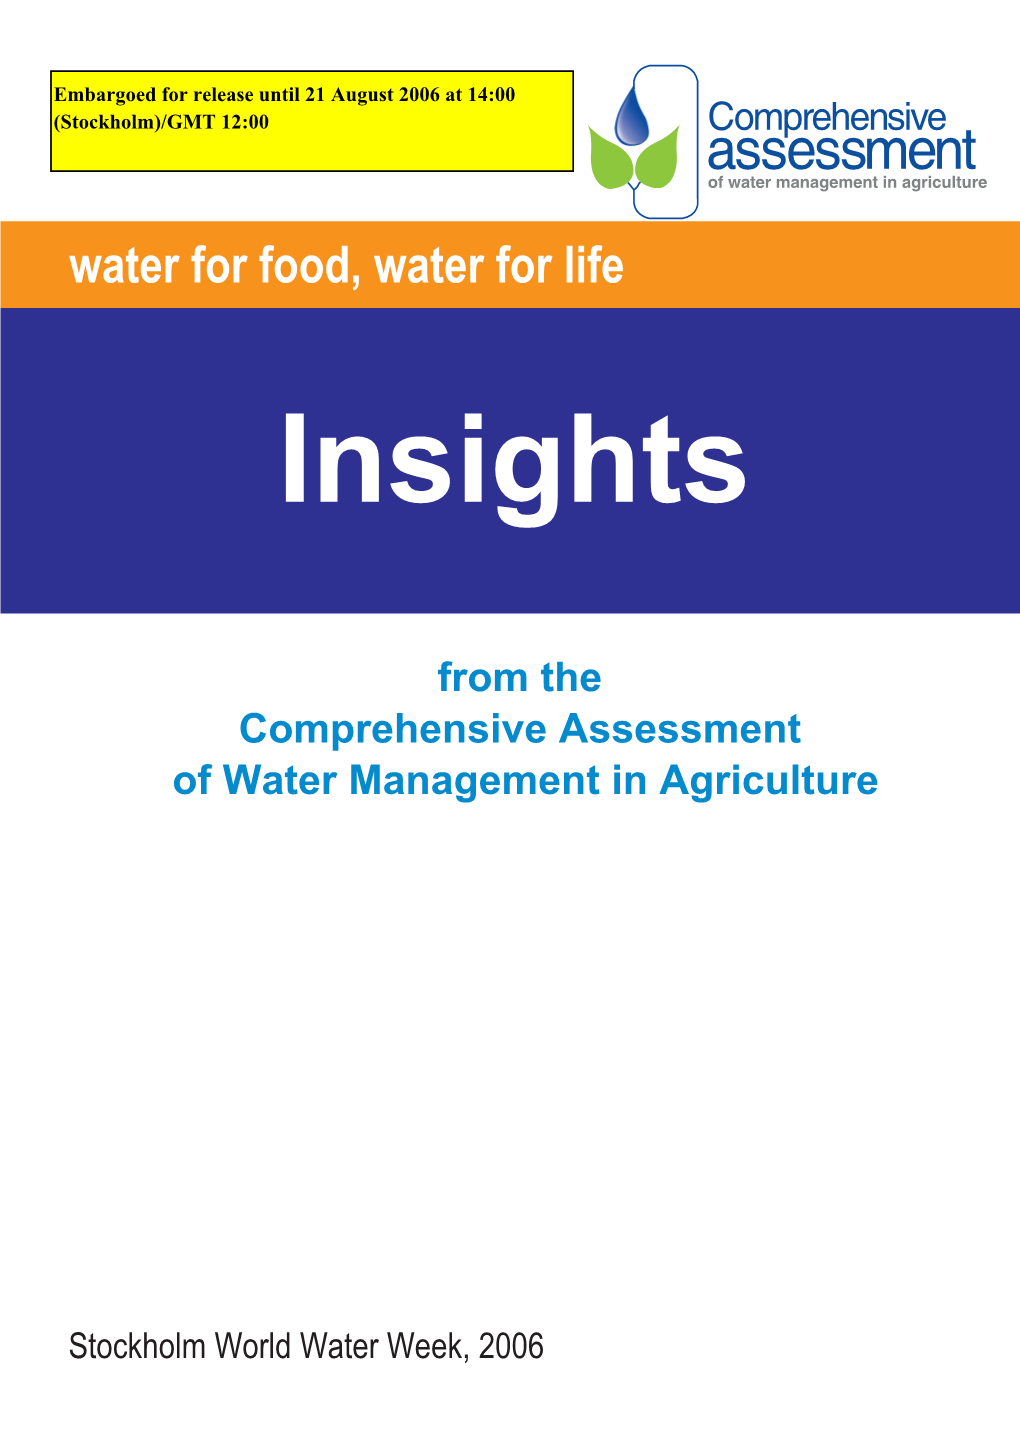 Insights from the Comprehensive Assessment of Water Management in Agriculture